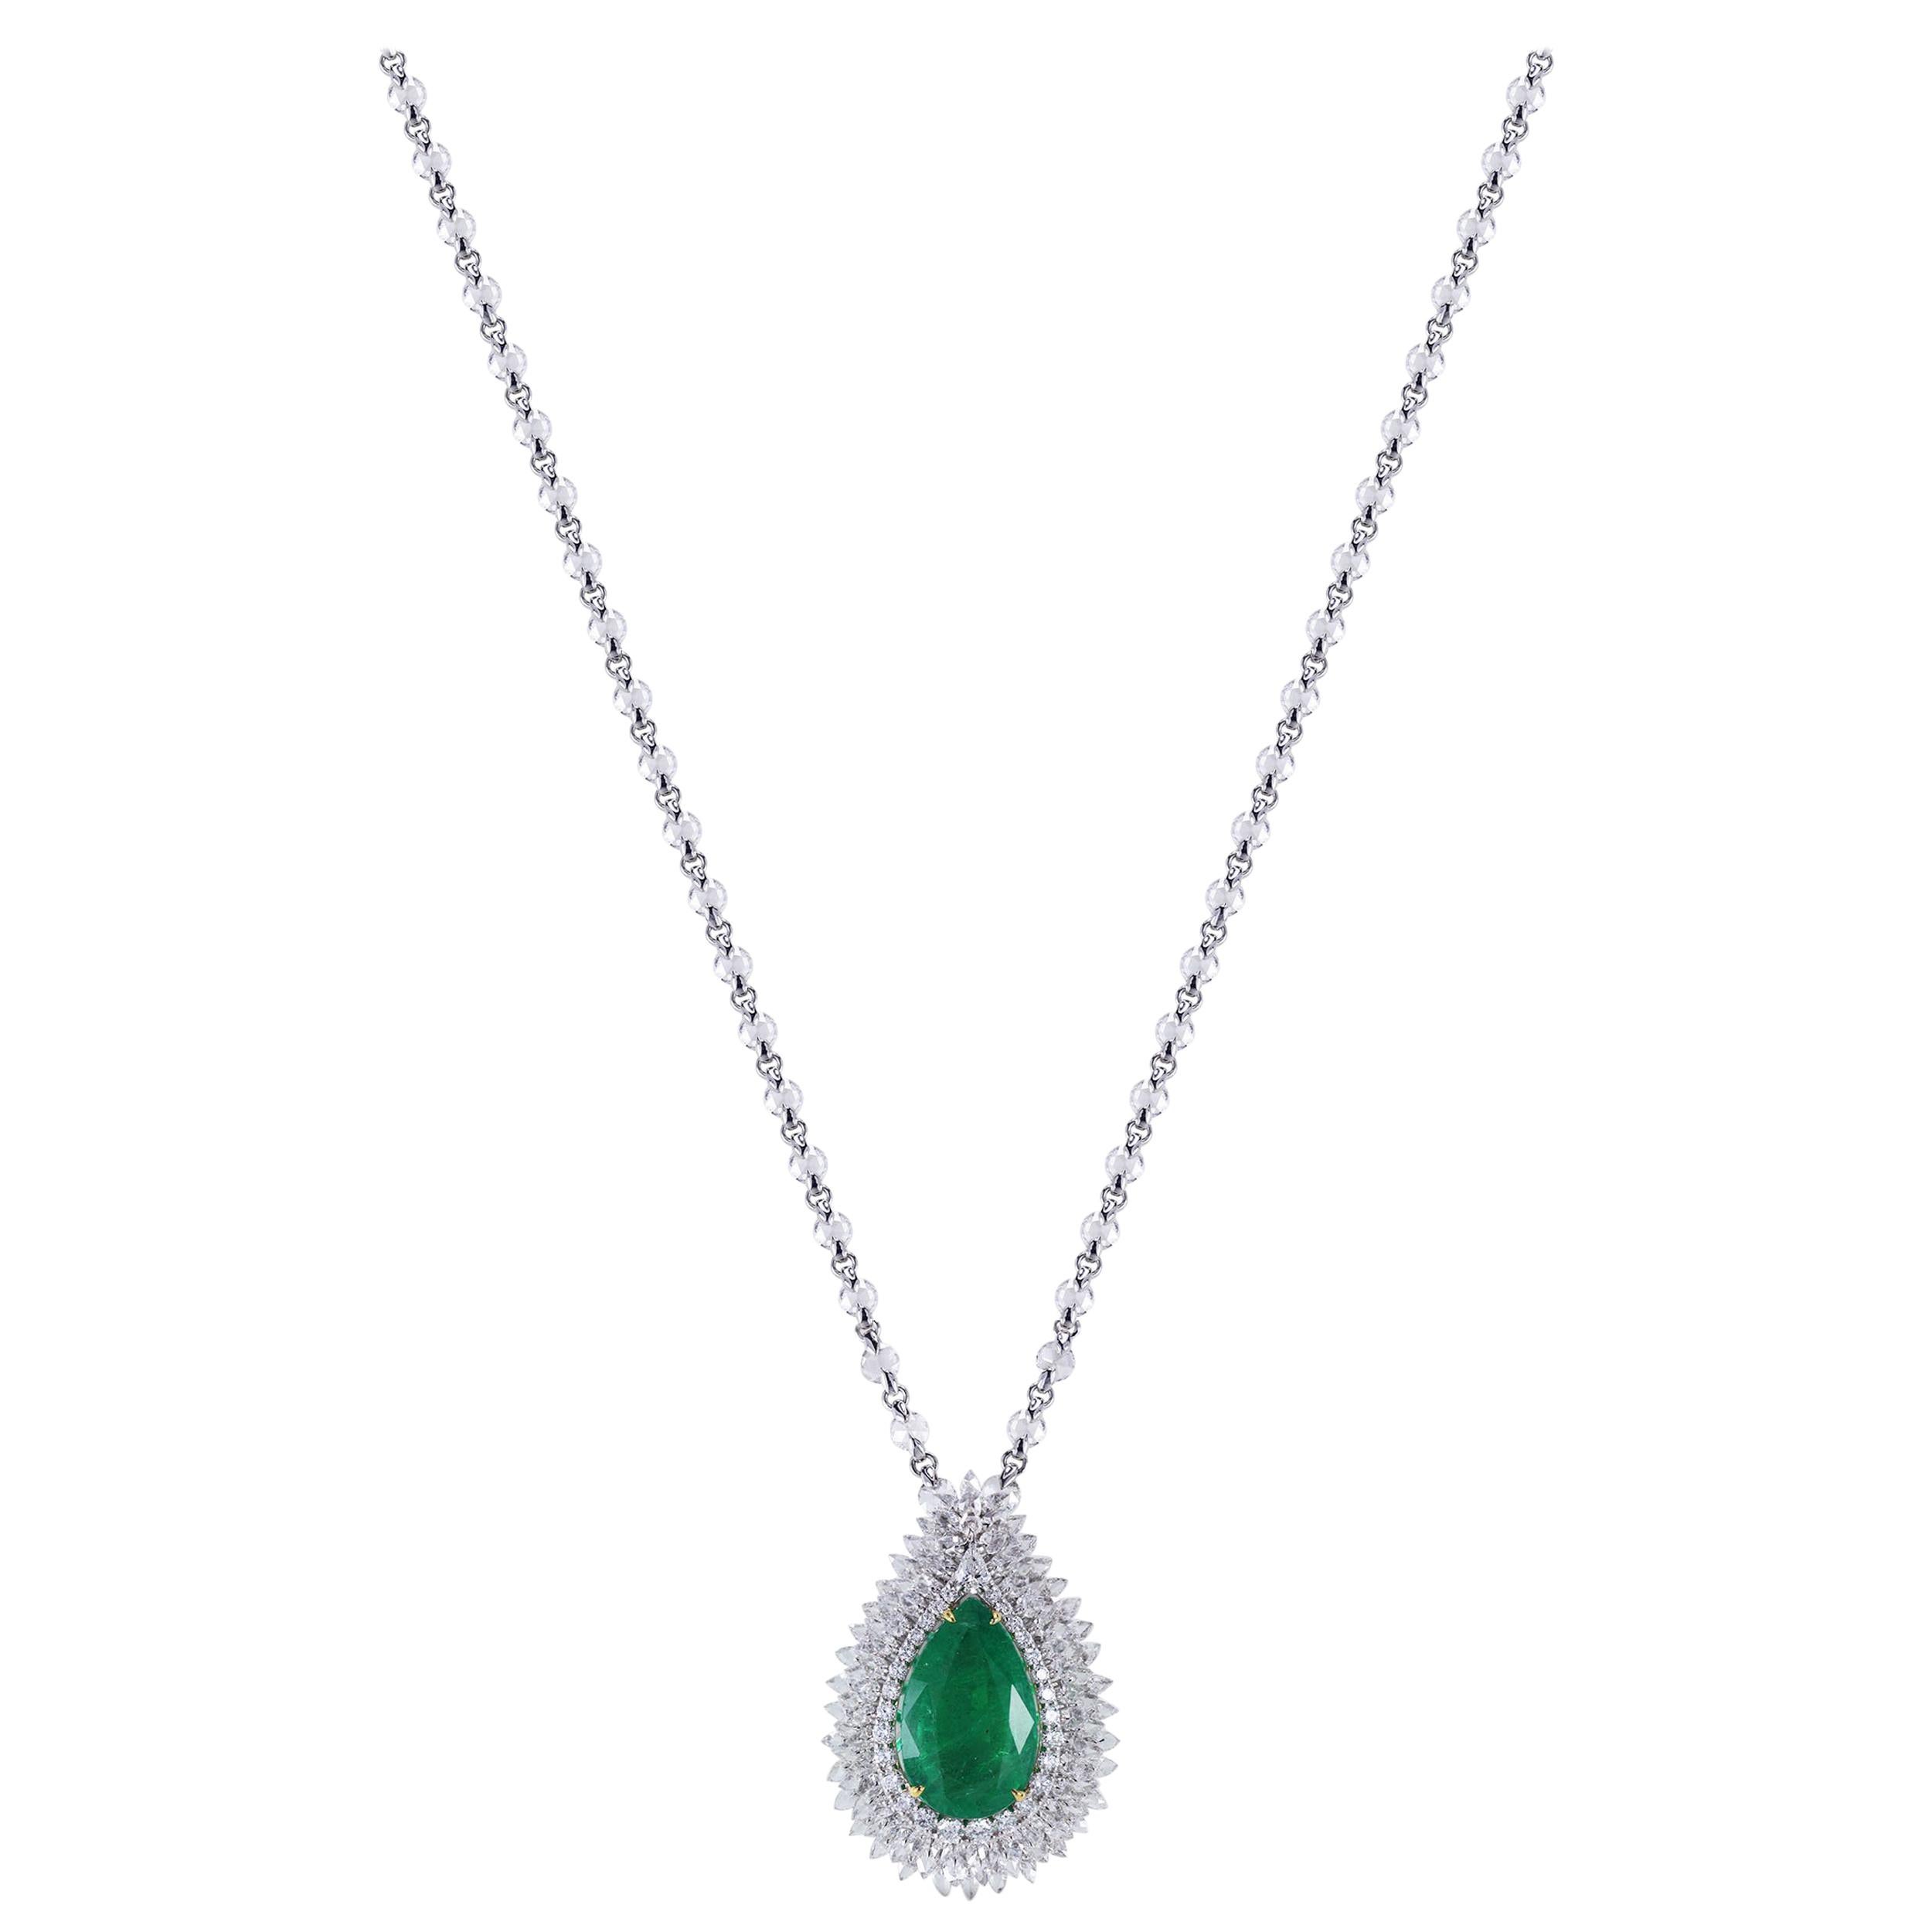 Diamond and emerald necklace

Simple, elegant and effortless is always the ultimate sartorial statement. Achieve that seamlessly with this 18K white gold necklace featuring pear and round rosecut and round brilliant cut diamonds and an emerald set